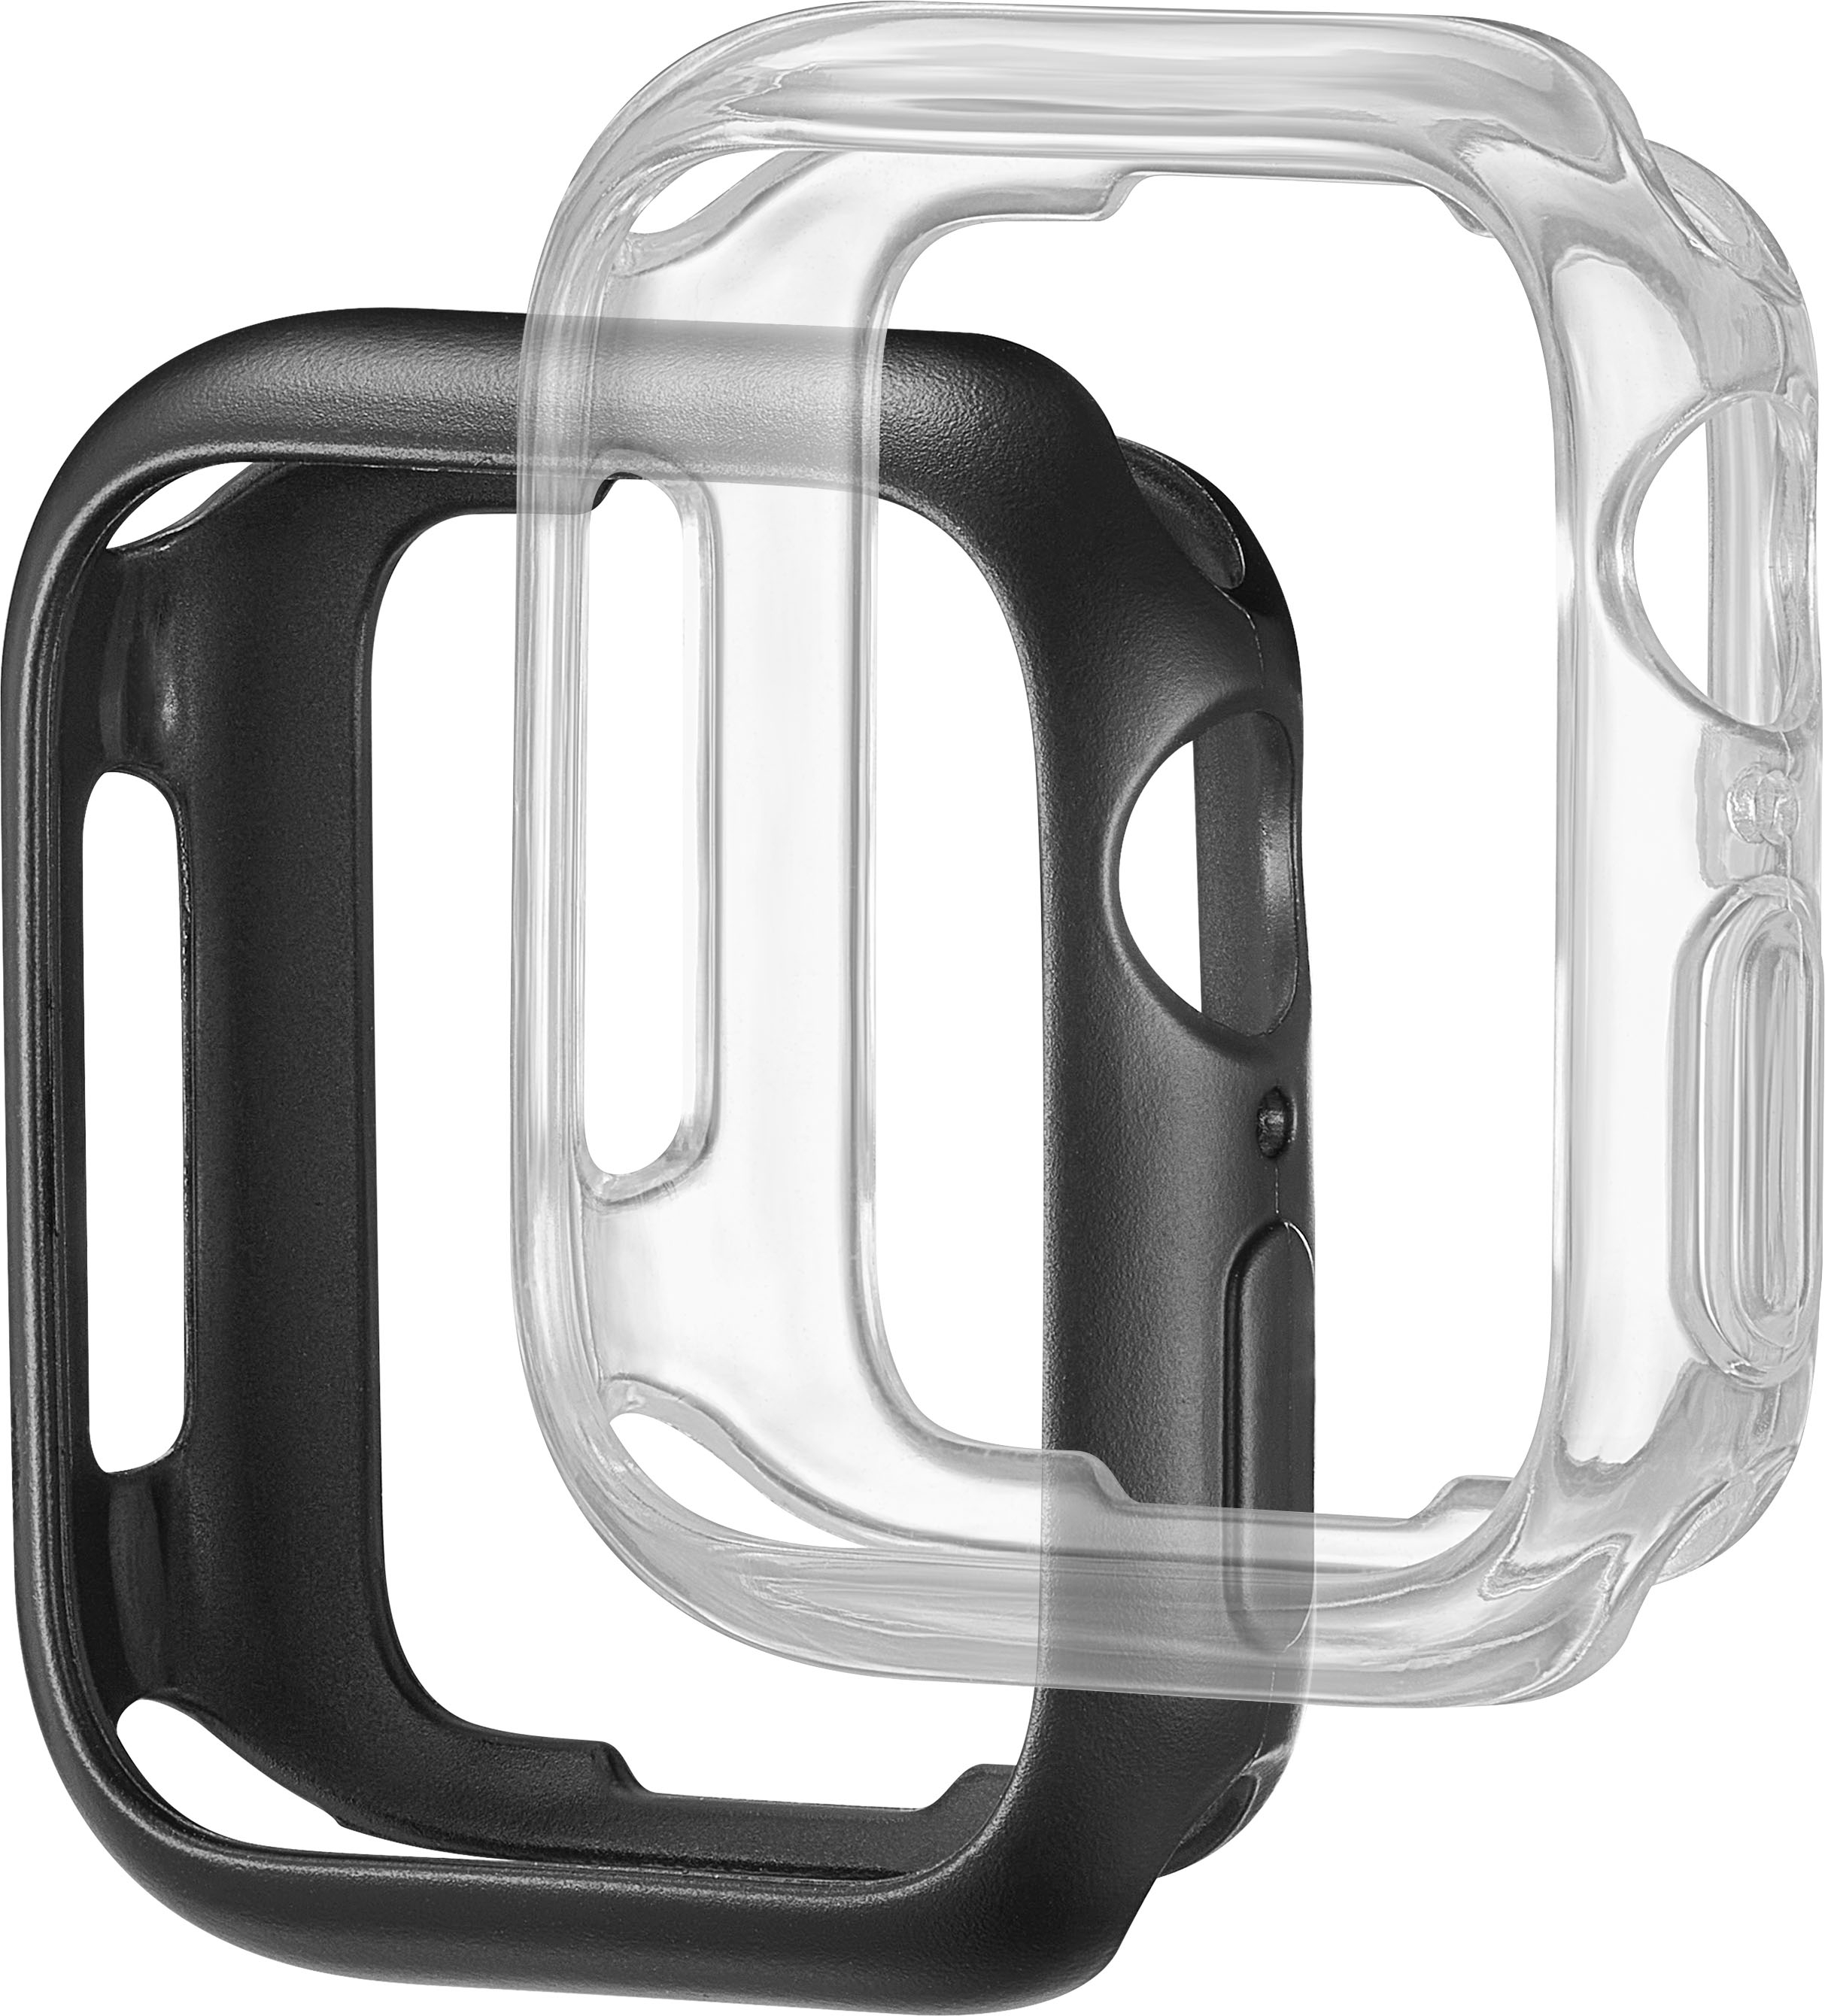 Questions and Answers: Insignia™ Bumper Cases for Apple Watch 41mm (2 ...